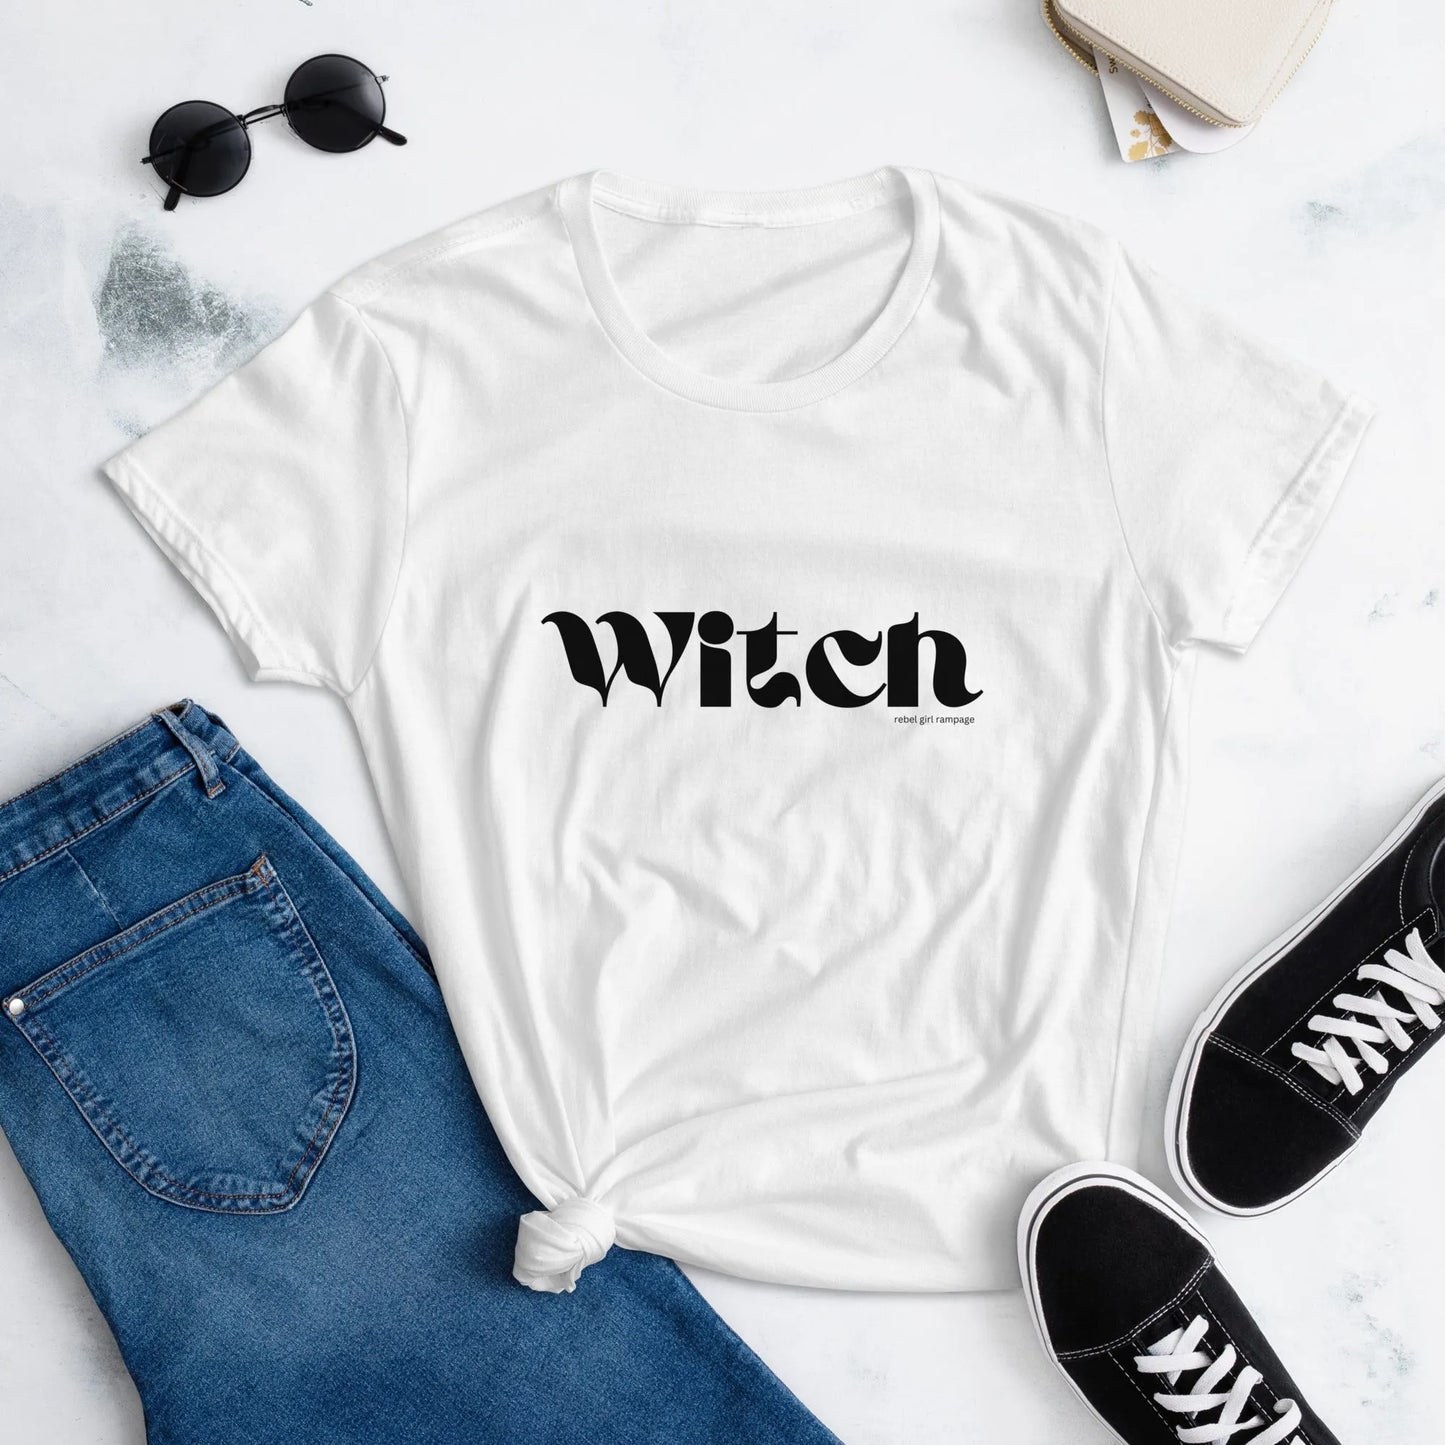 Witch Women’s T- Shirt Girl Power Magic coven spell work Cotton witchy woman by Rebel Girl Rampage 